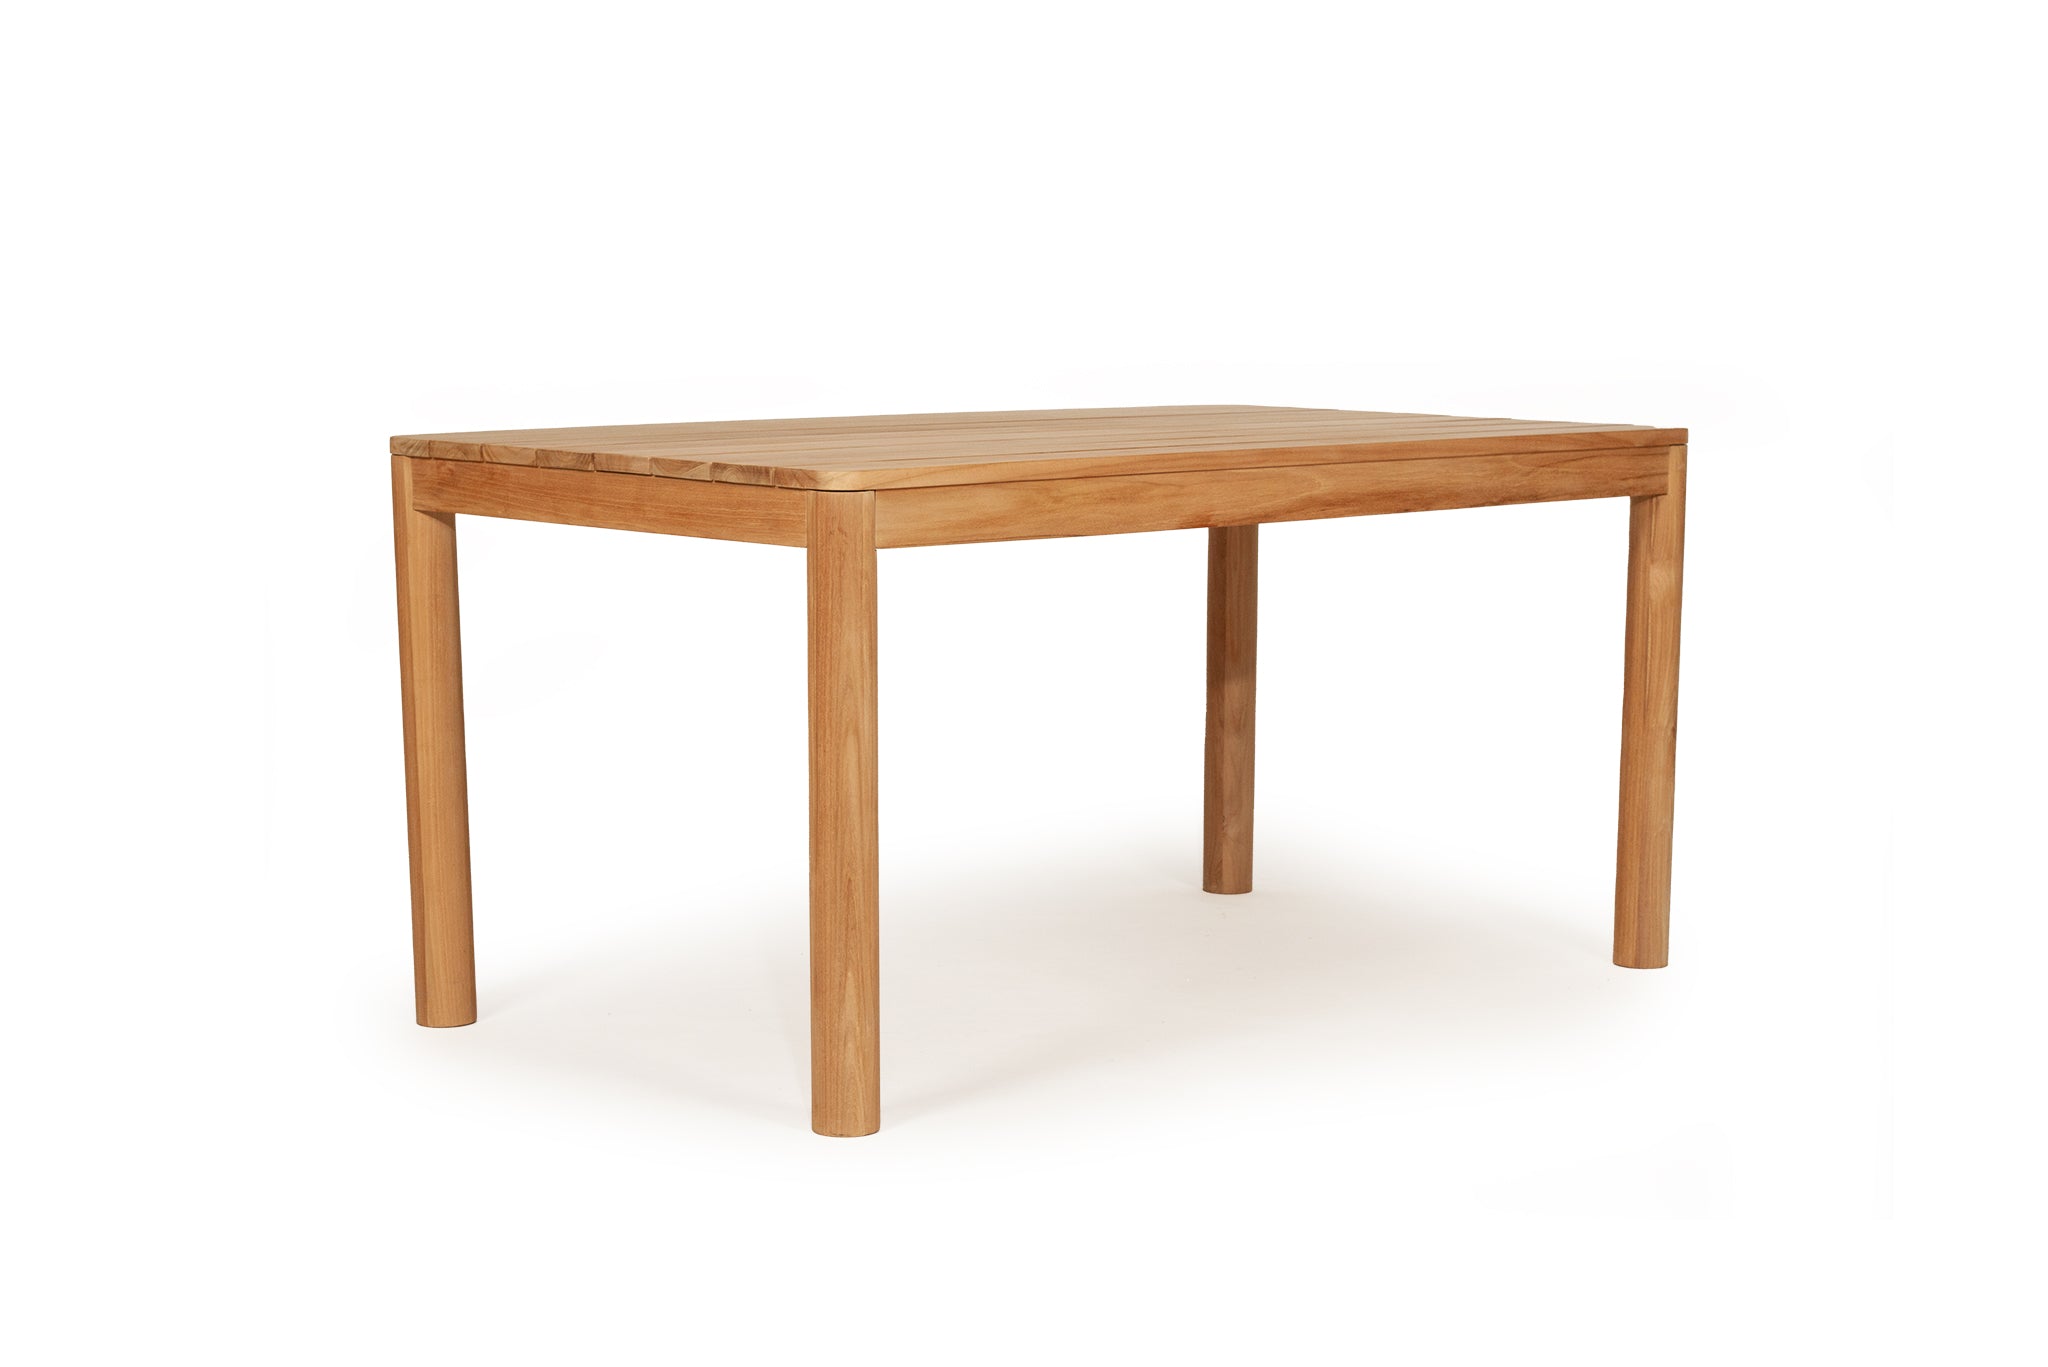 Lithgow Teak Outdoor Dining Table